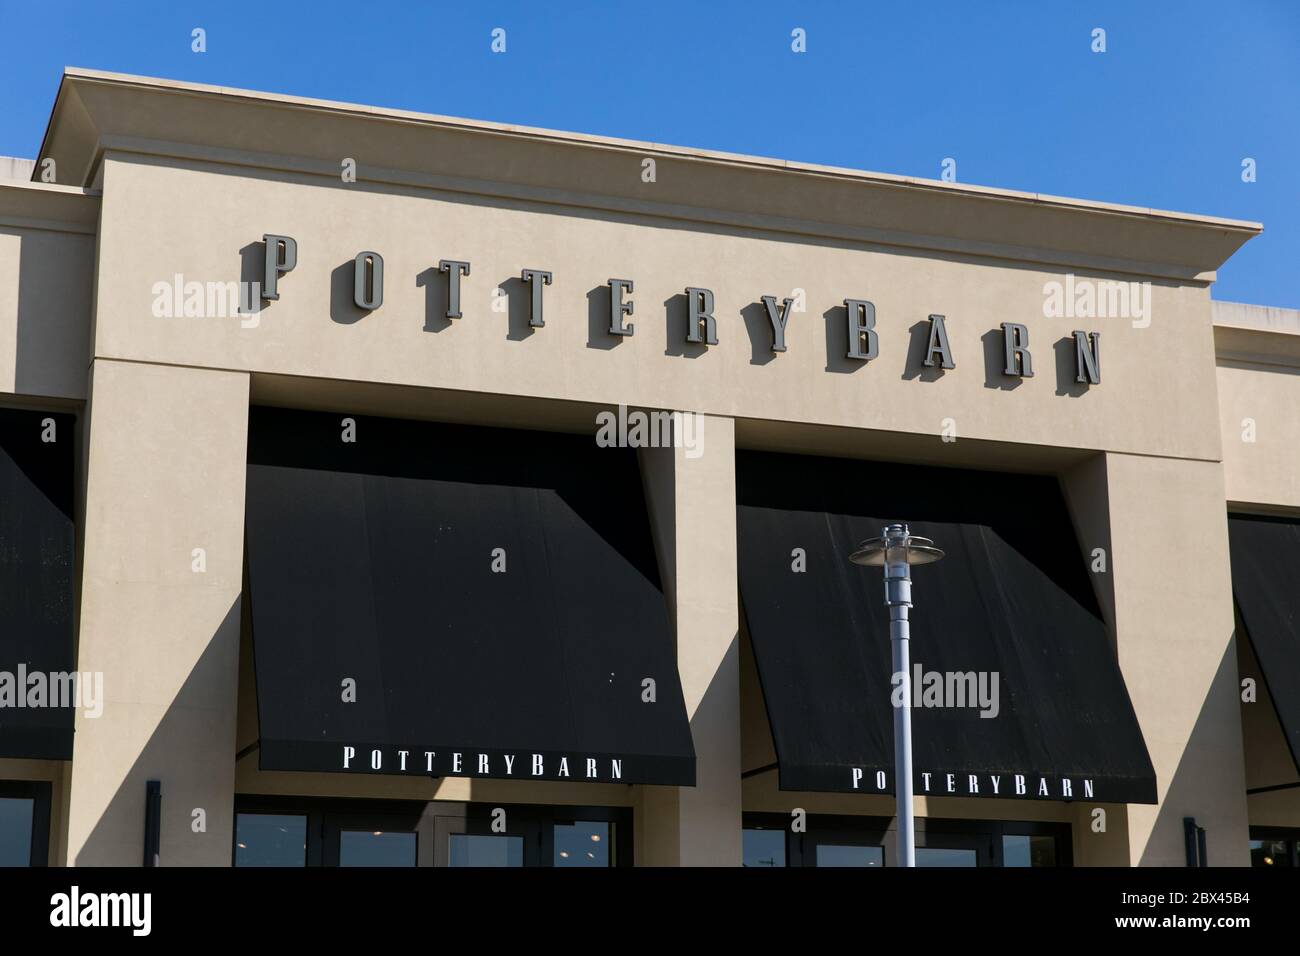 A logo sign outside of a Pottery Barn retail store location in Annapolis, Maryland on May 25, 2020. Stock Photo